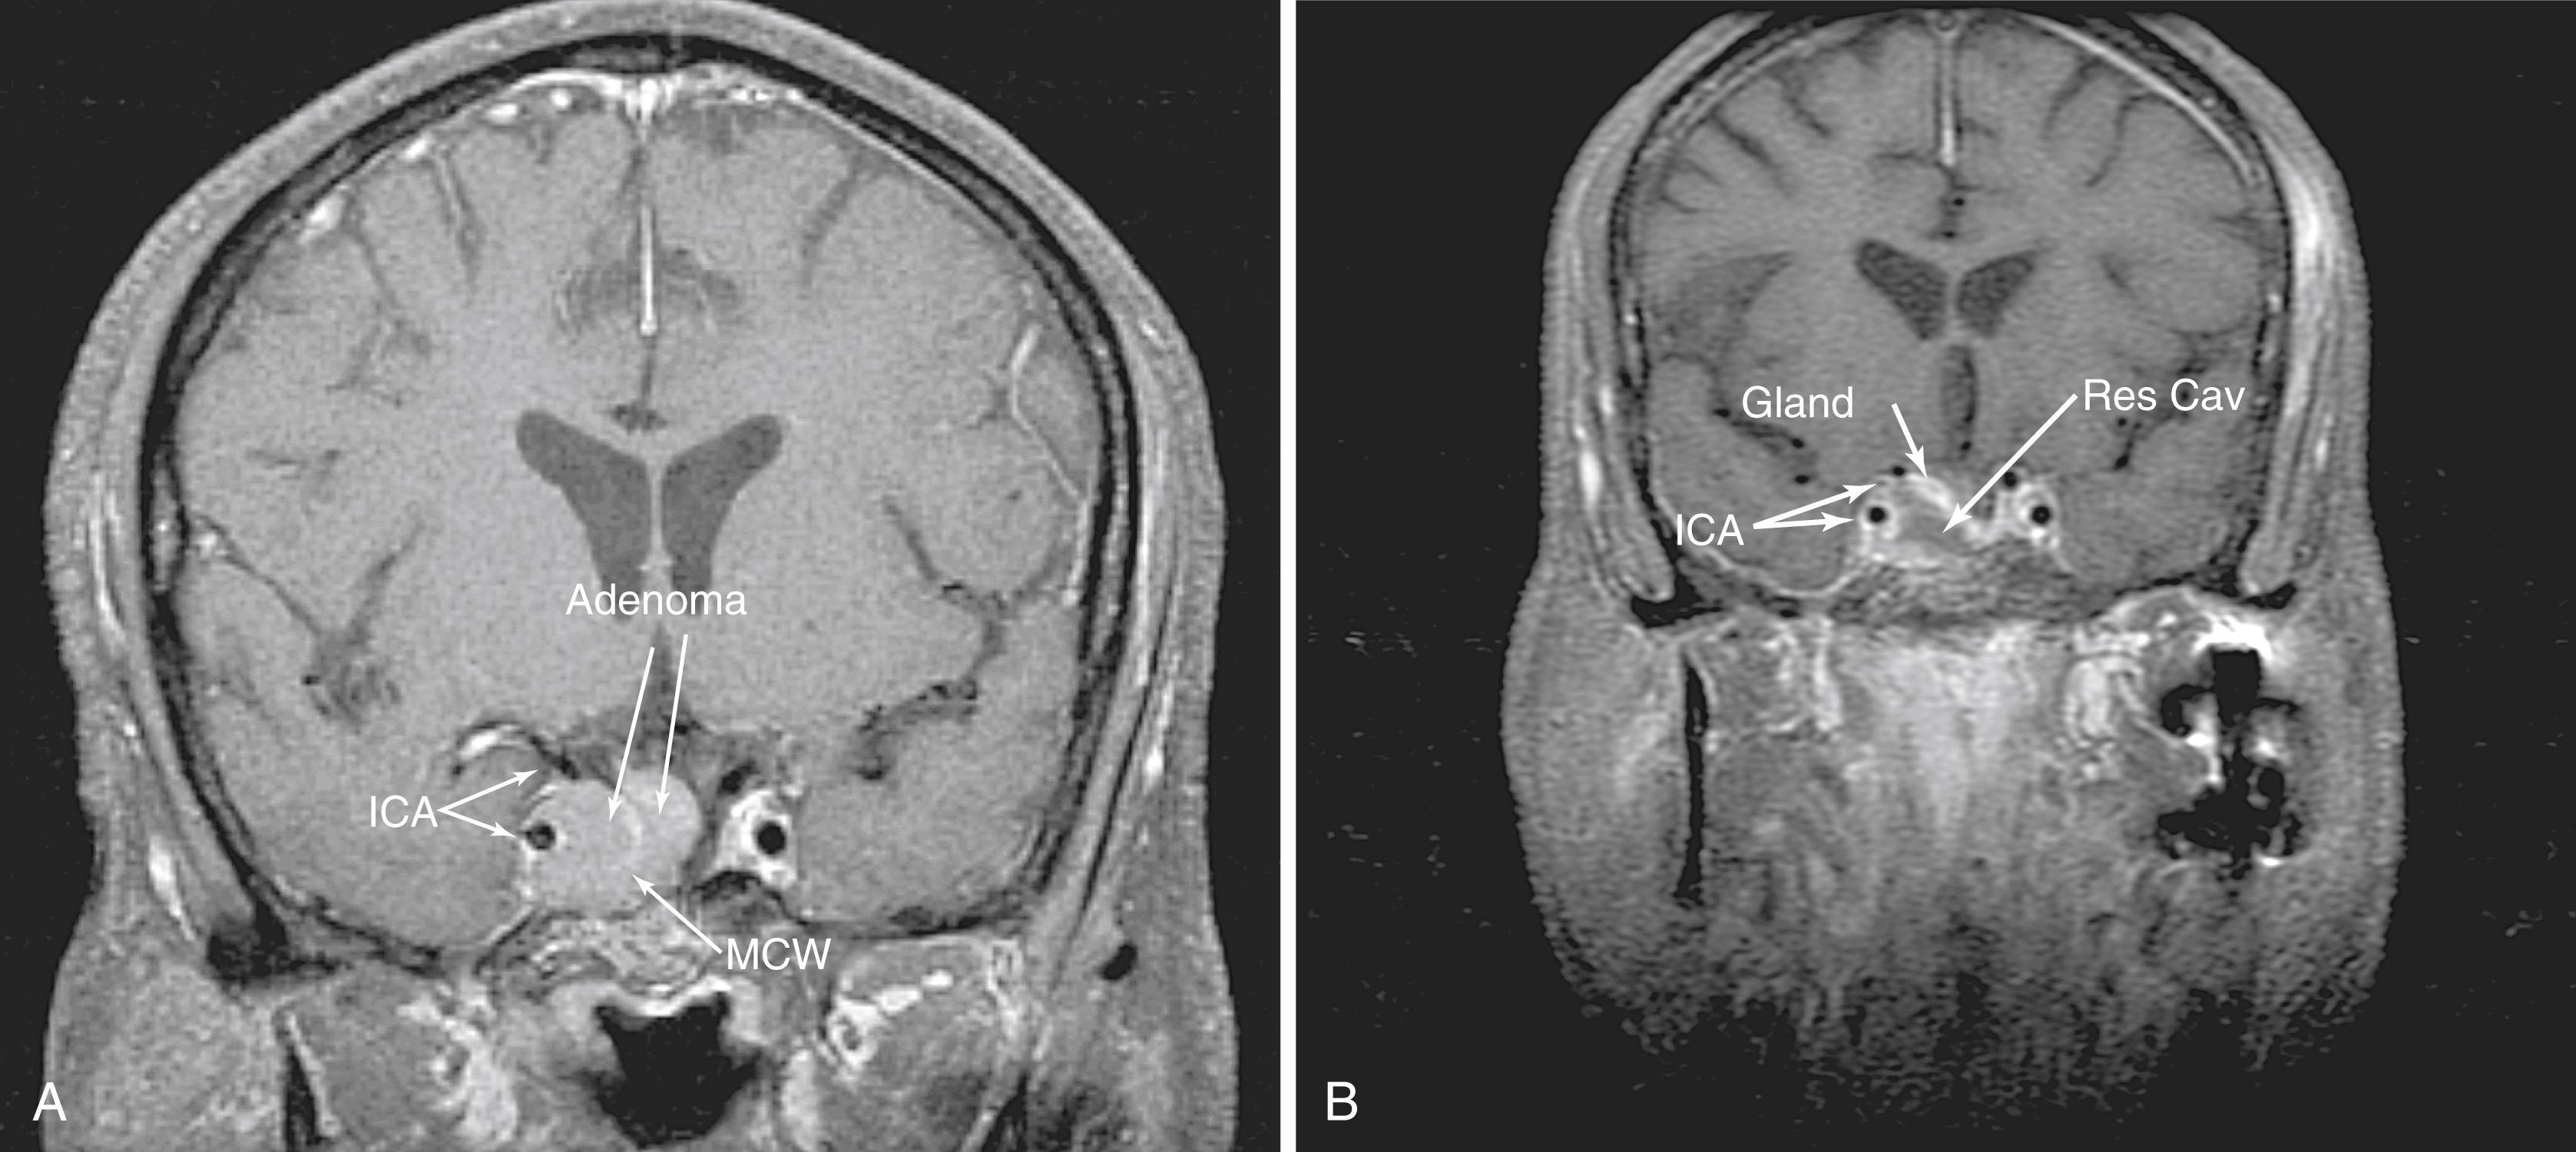 Fig. 50.8, (A) A preoperative, contrast-enhanced coronal magnetic resonance image (MRI) showing recurrent pituitary adenoma largely involving the medial cavernous sinus, as evidenced by the enhancing medial cavernous wall (MCW). (B) Postoperative, contrast-enhanced, coronal MRI showing complete resection of the tumor, including the portion in the medial cavernous sinus. The remaining pituitary gland and normal cavernous sinus contents are more apparent following tumor resection. ICA, Cavernous internal carotid artery; MCW, medial cavernous wall; Res Cav, tumor resection cavity.